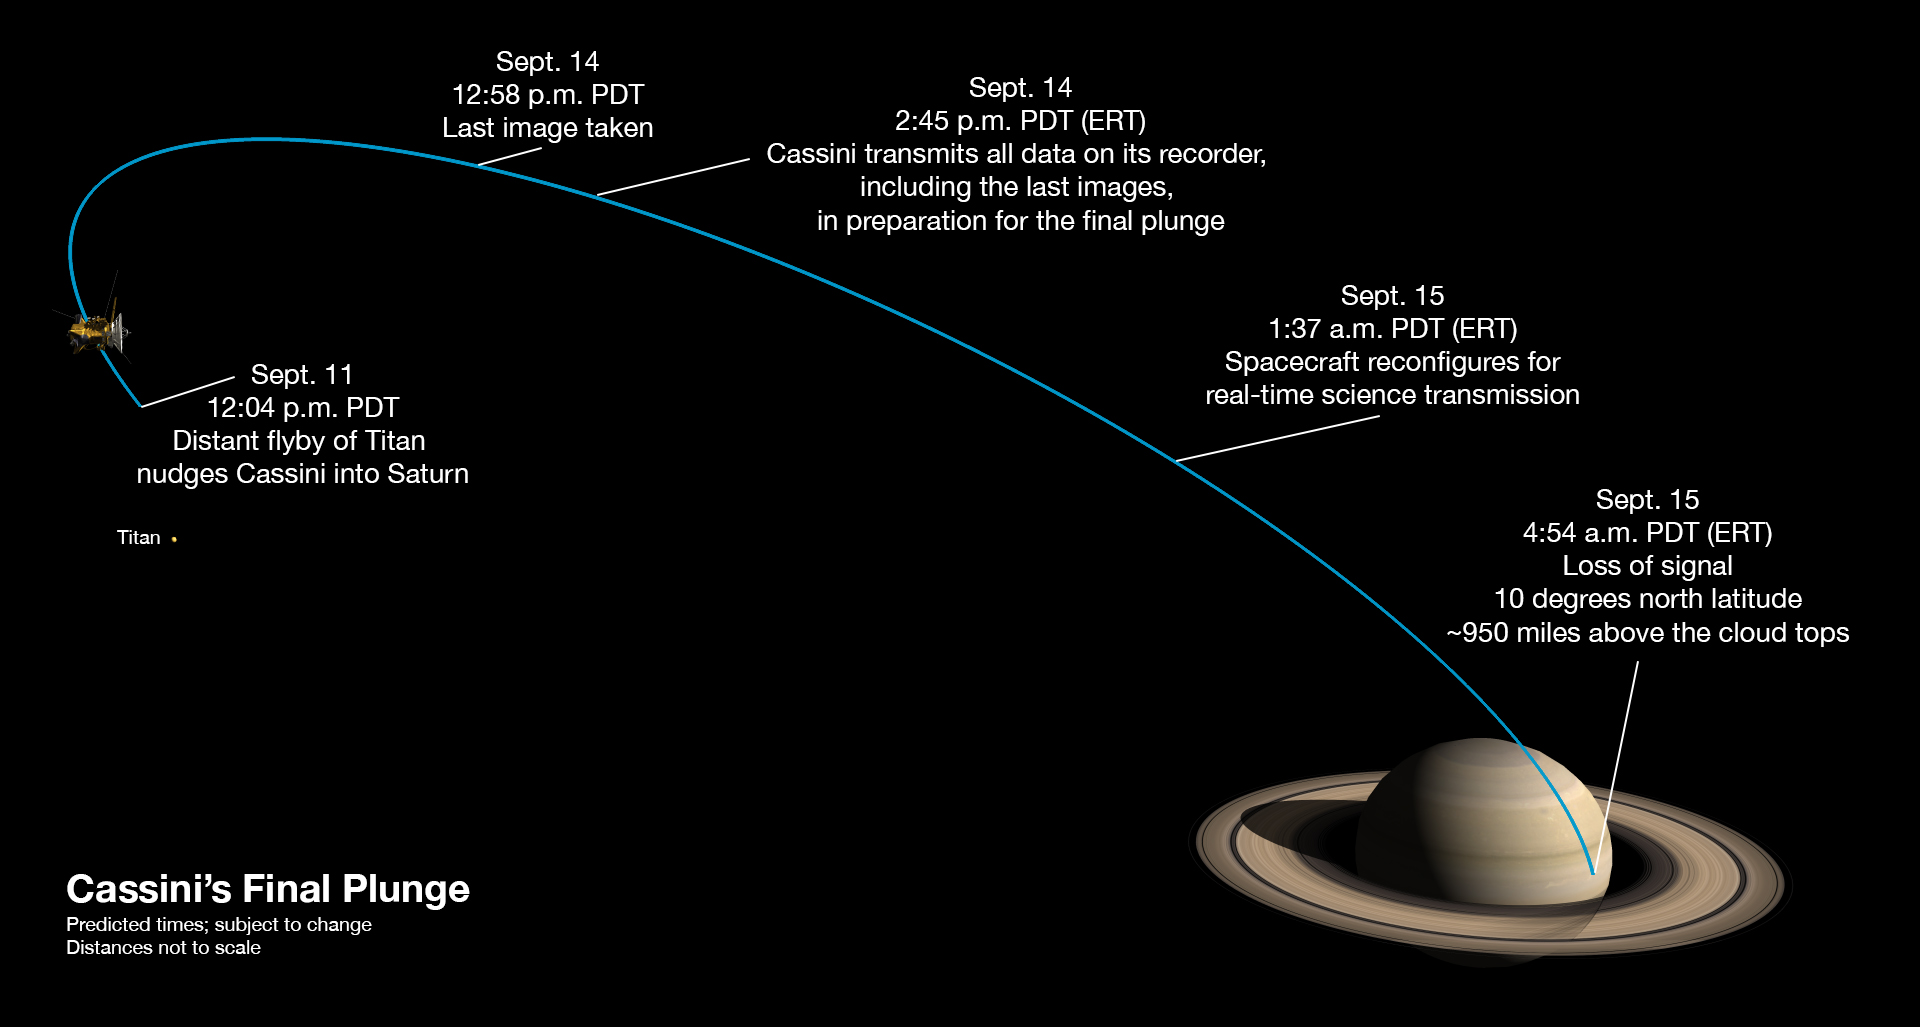 NASA image showing the trajectory of Cassini into Saturn